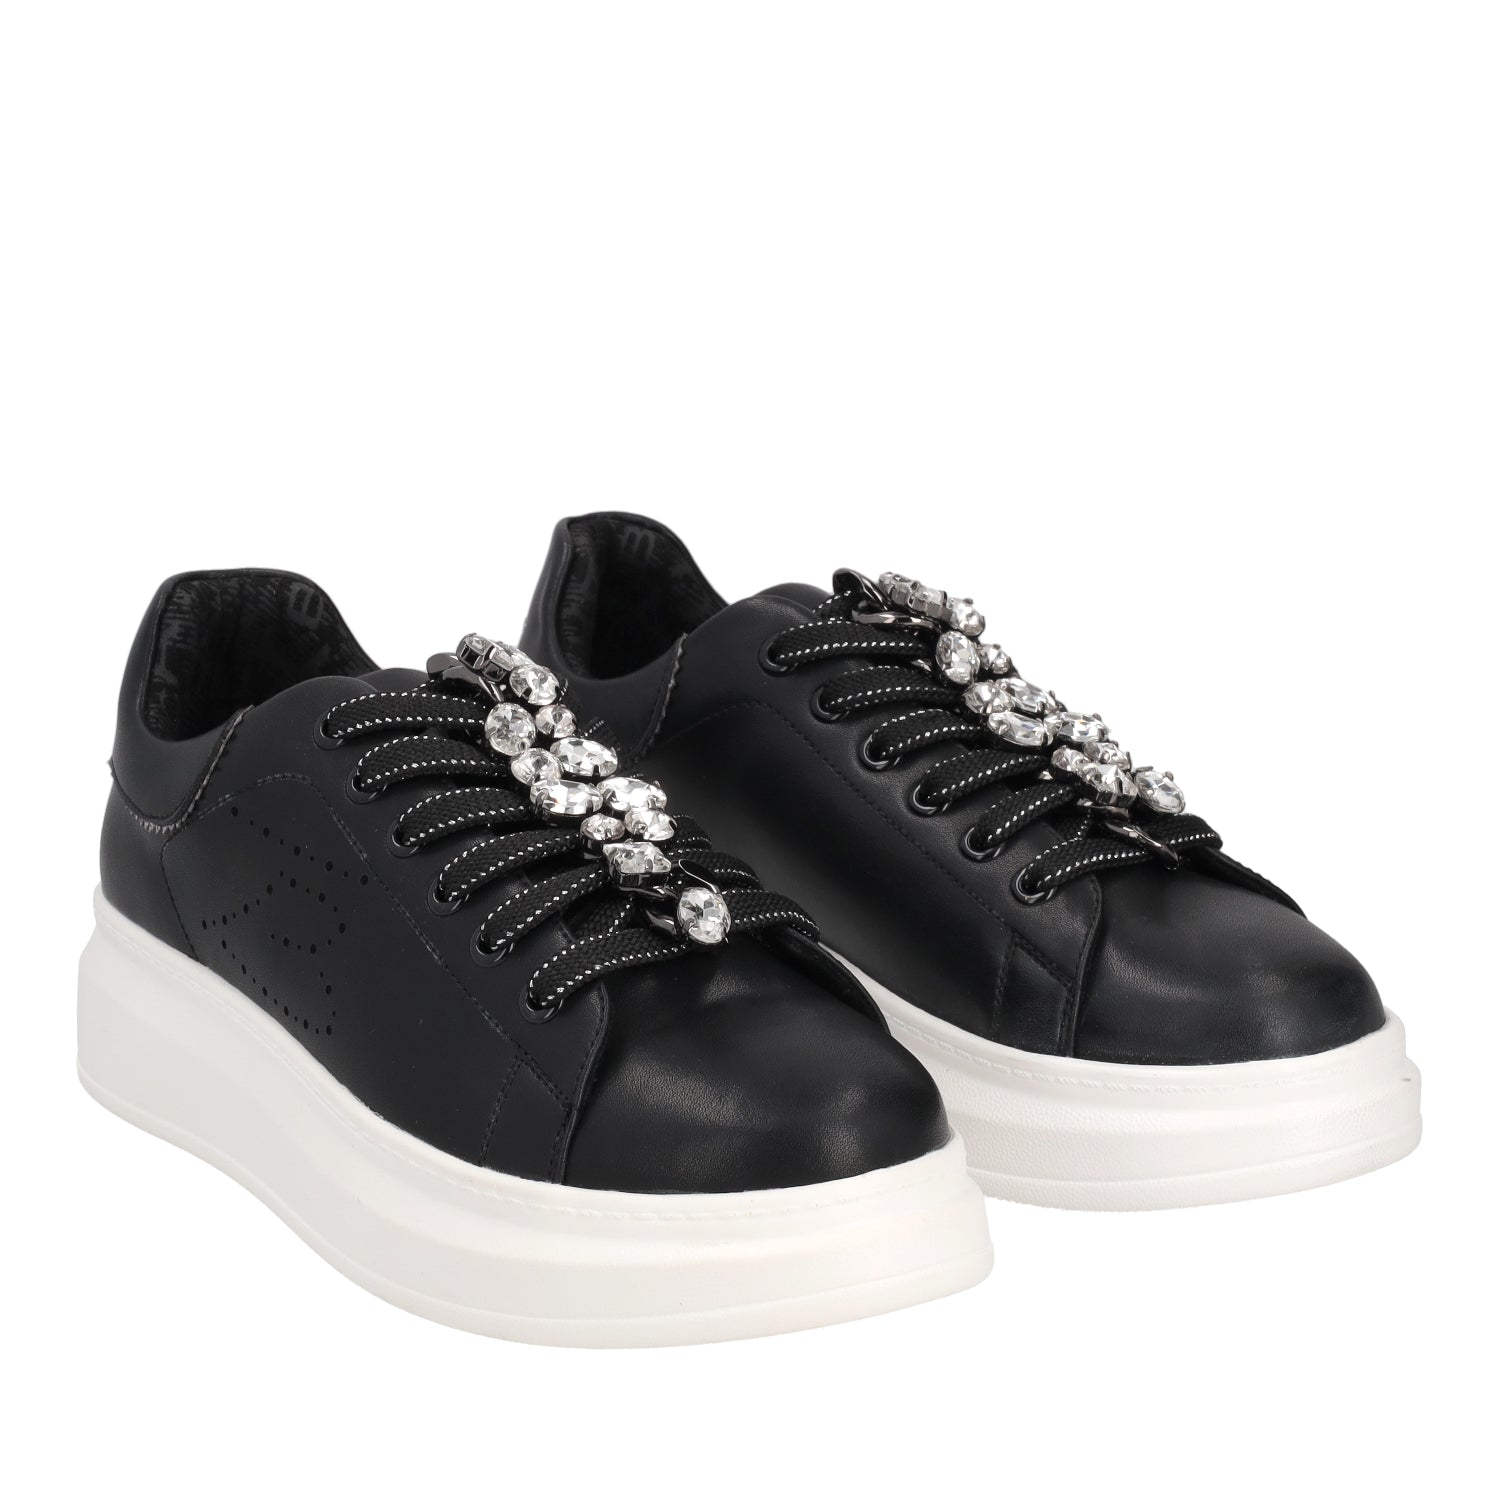 BLACK-&-SILVER “BLUES” SNEAKER IN 100% LEATHER WITH GLEAMING CHAIN DET